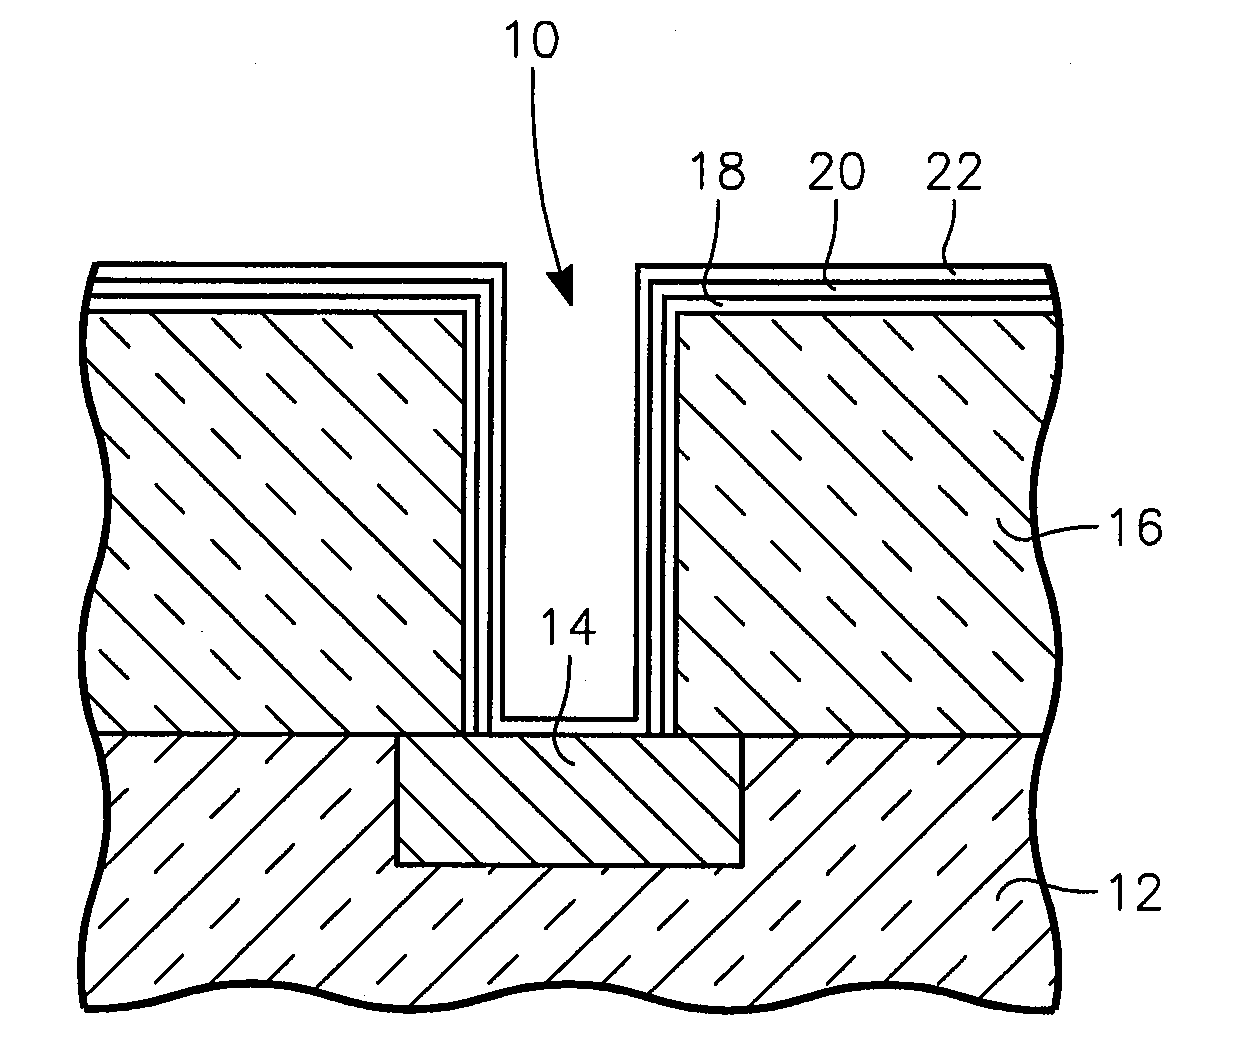 Oxidized Barrier Layer